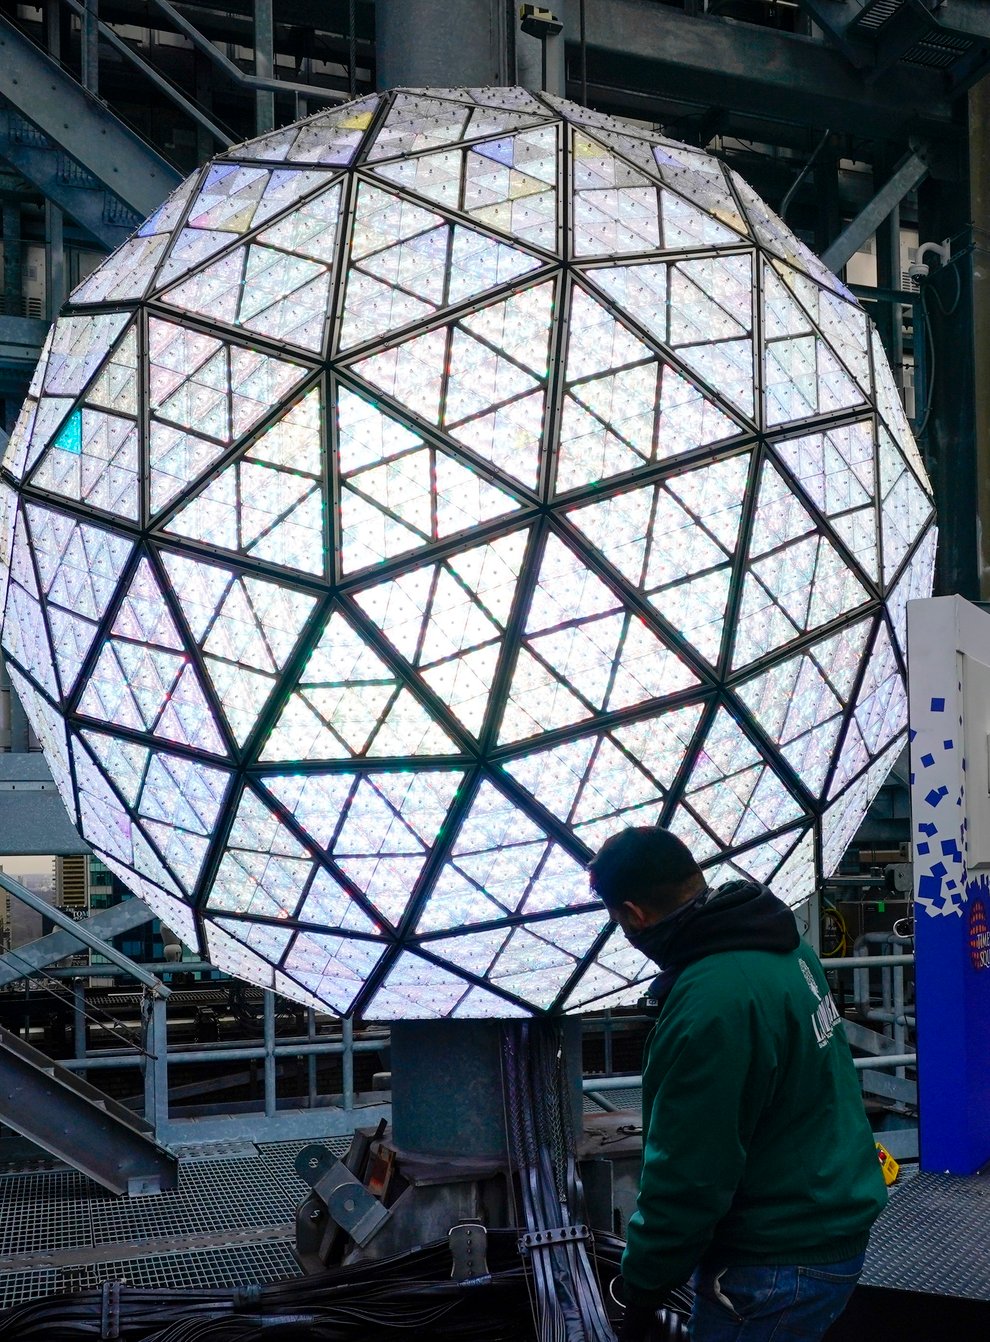 Event organisers test the New Year’s Eve Ball ahead of the official Times Square celebration in New York